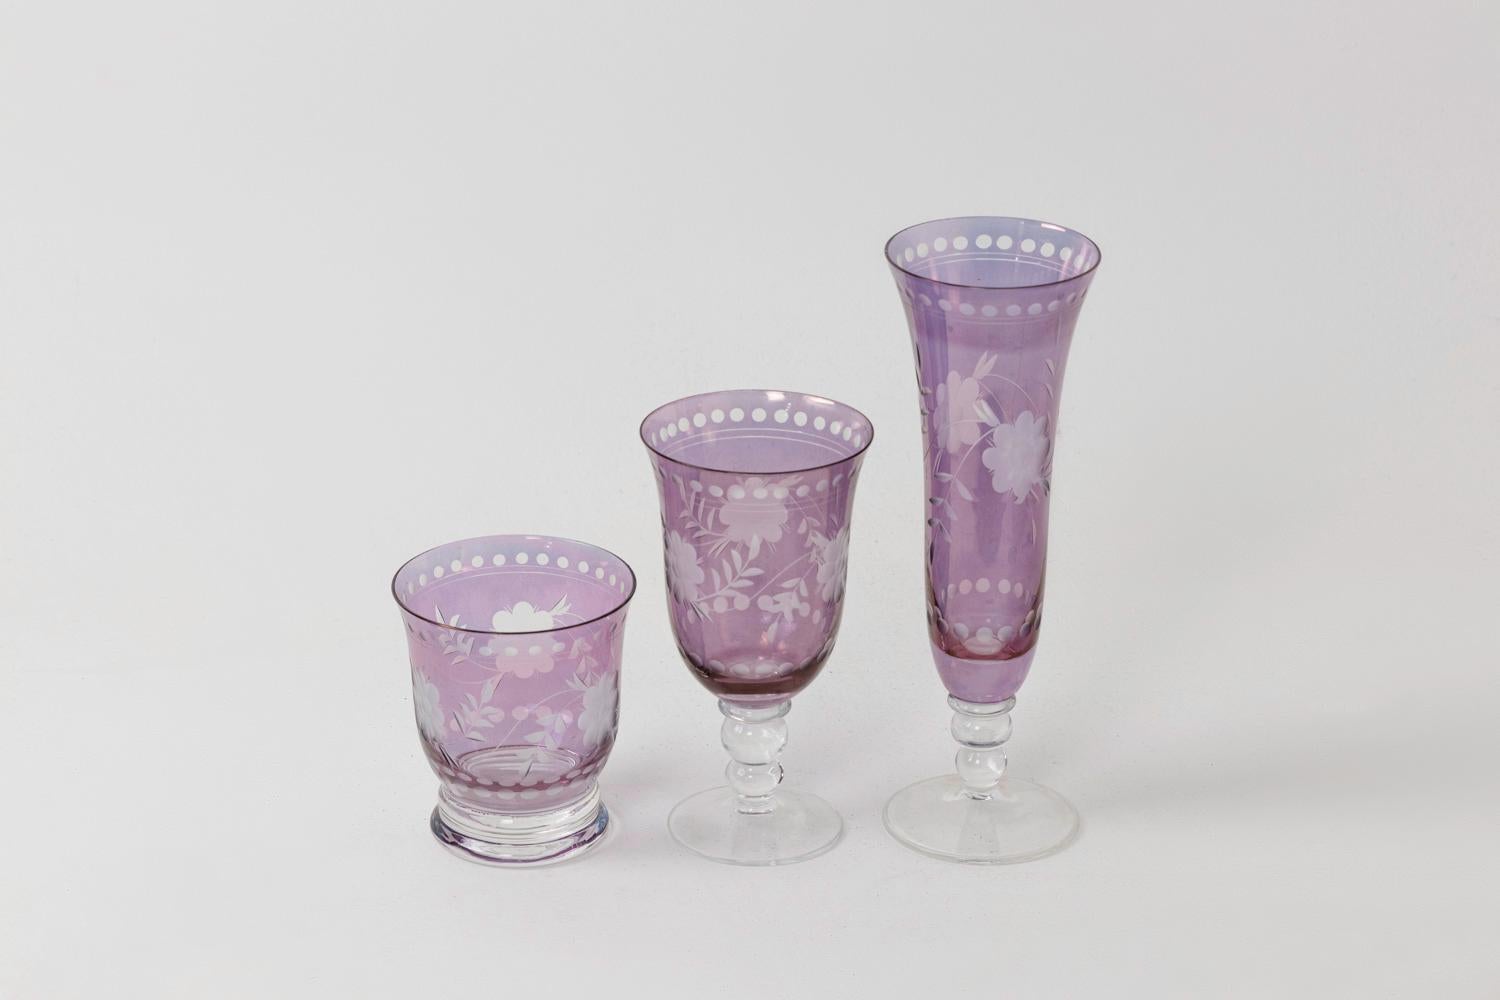 European Bohemian crystal style glassware set, contemporary work For Sale